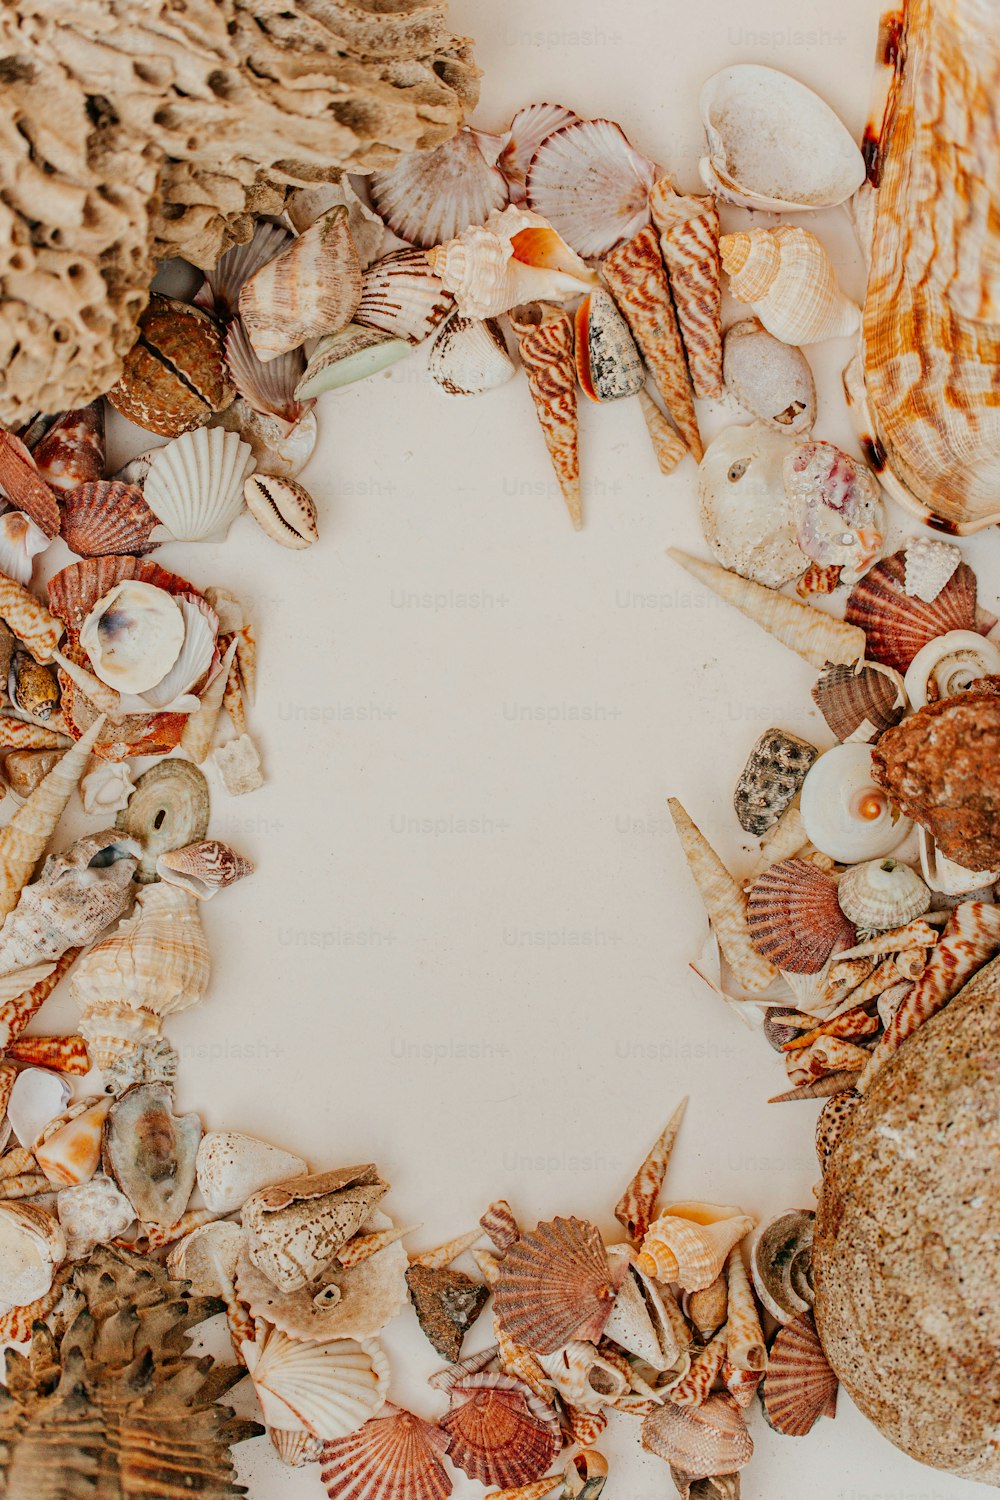 a circle of seashells on a white surface